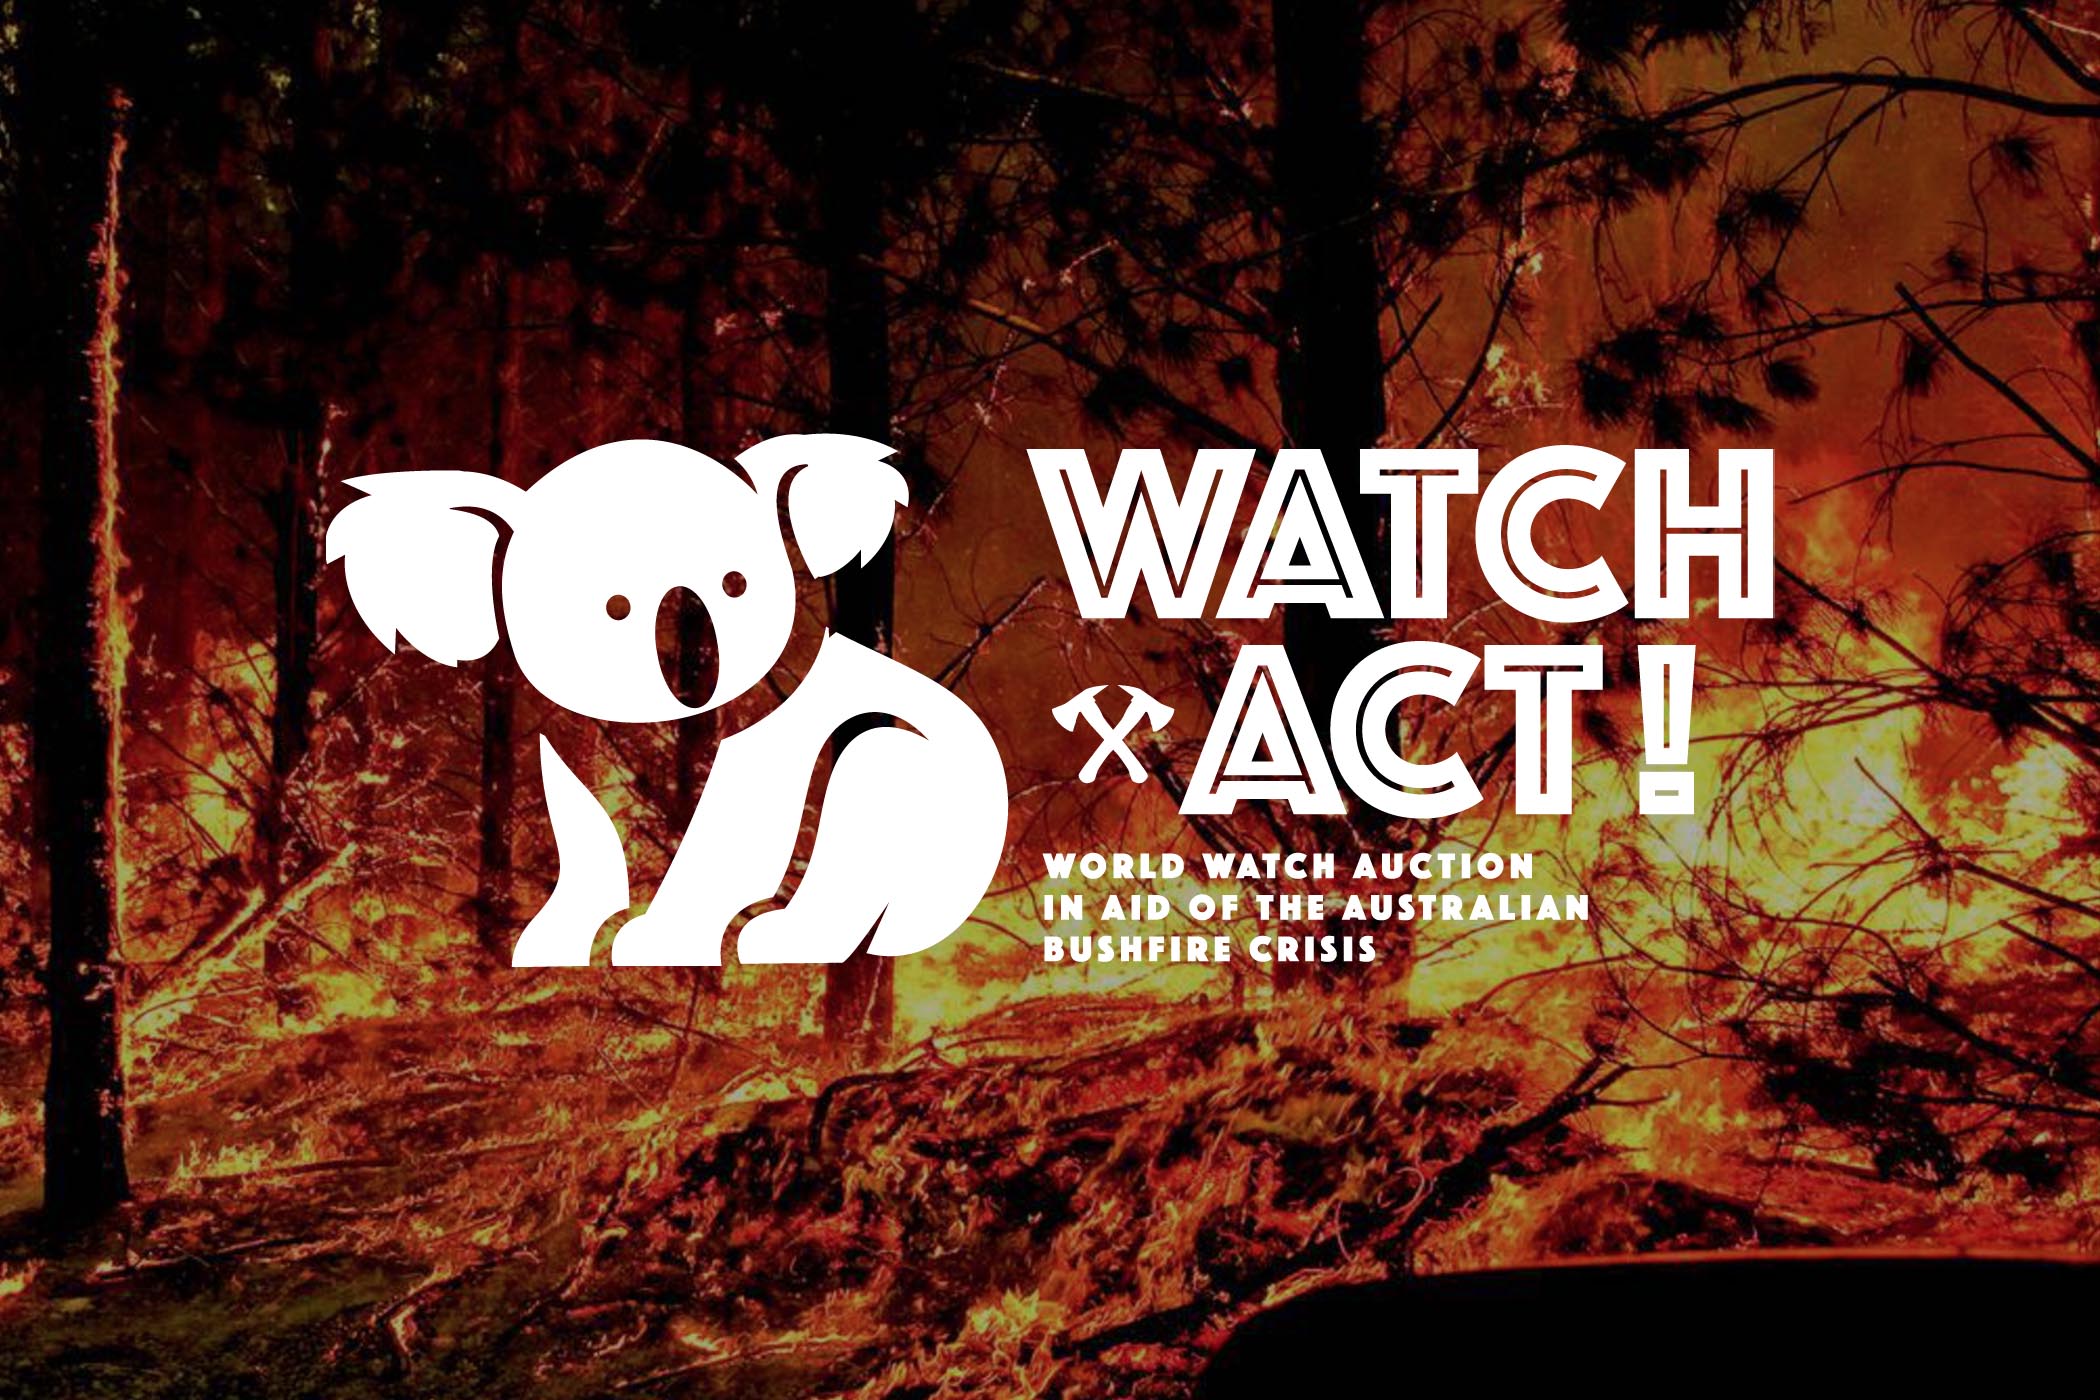 Watch and Act - Watch Auction for Australian Bushfire Crisis